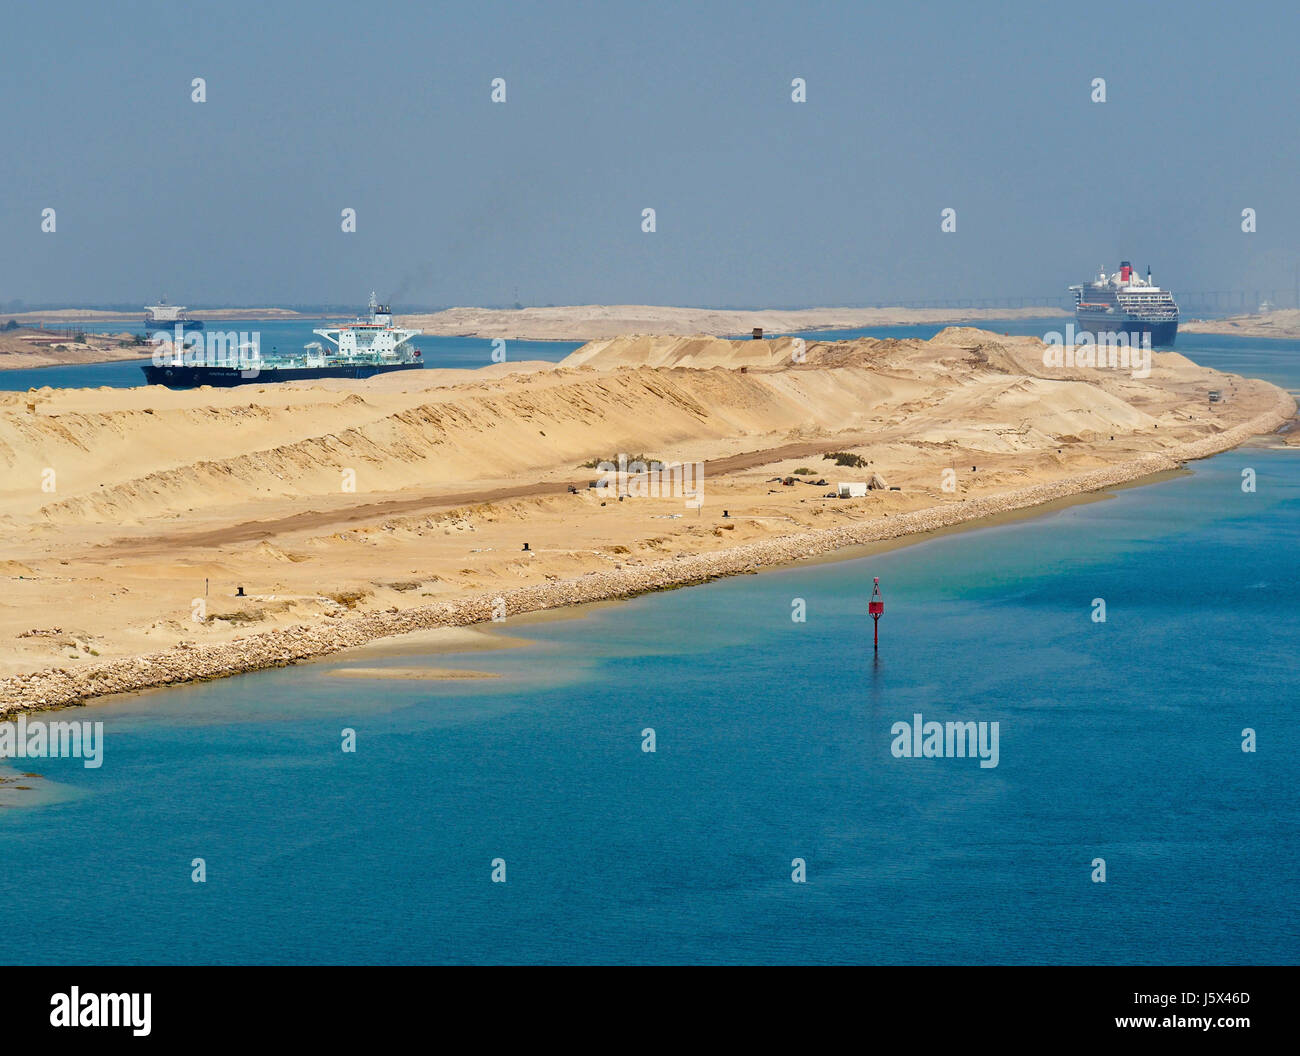 New section of Suez Canal with two way traffic, Queen Mary 2 headed north in right channel and oil tankers going south at left. Stock Photo